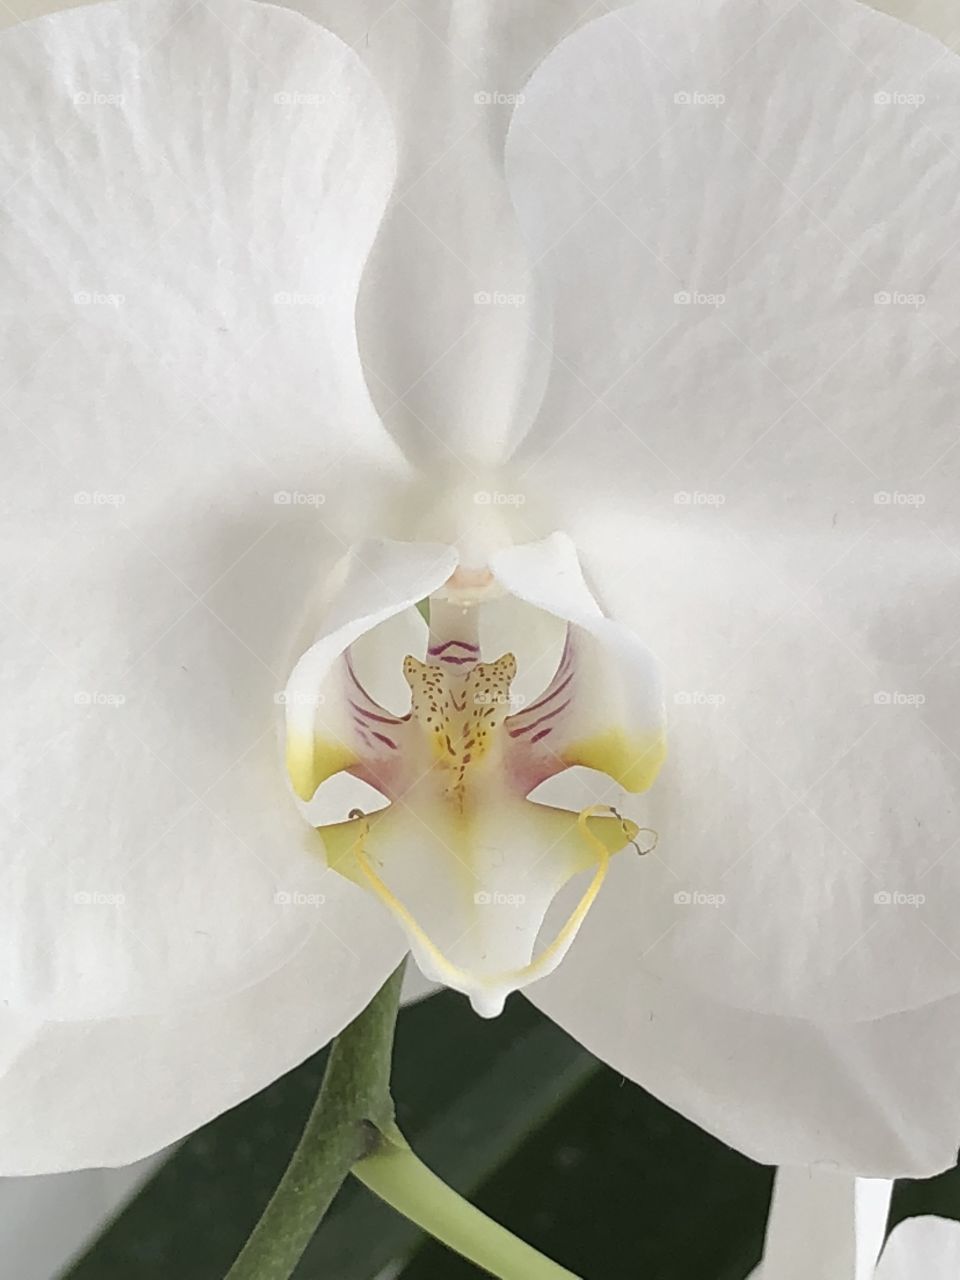 A beautiful white orchid wither hints of yellow, pink, and maroon in the center shown close-up